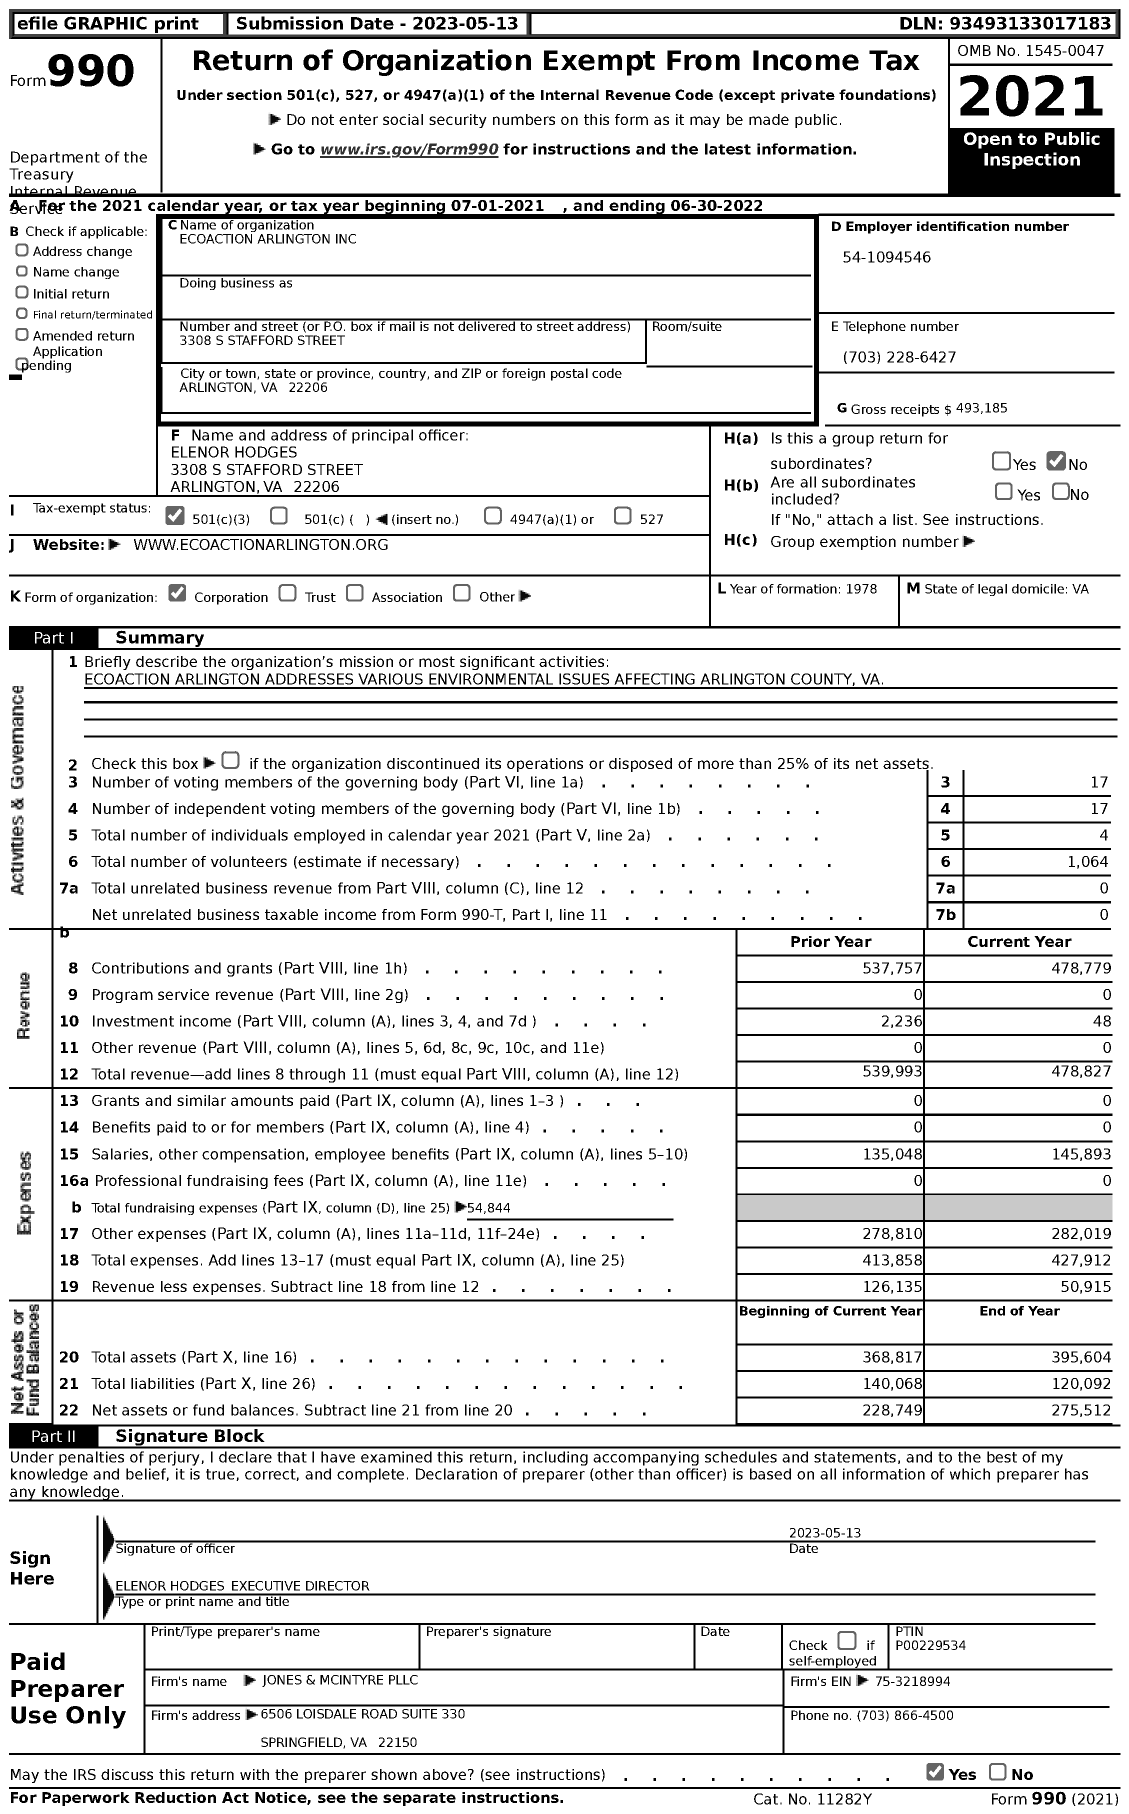 Image of first page of 2021 Form 990 for Ecoaction Arlington